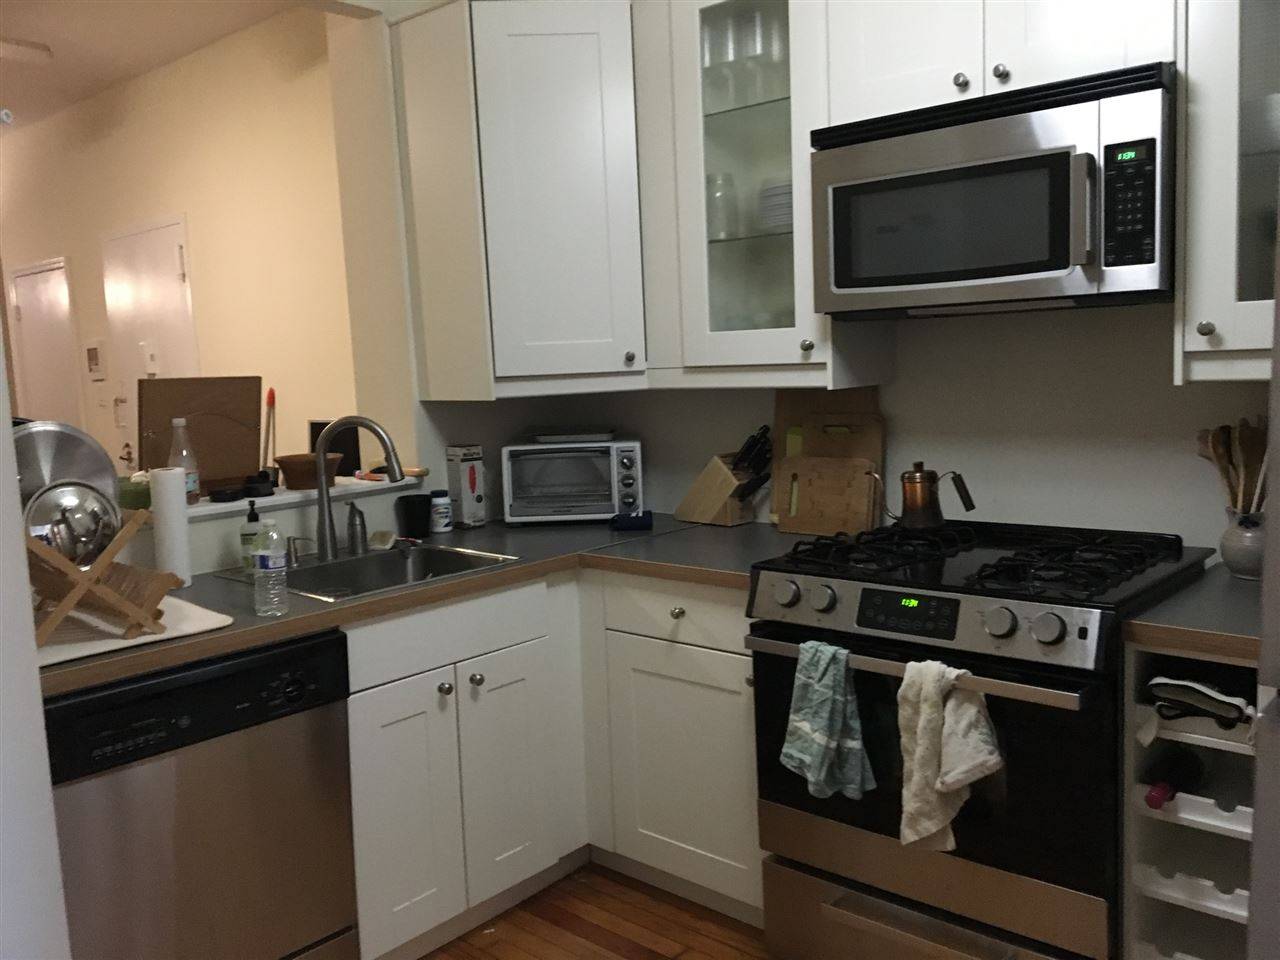 You will love this uptown two bedroom one bath condo rental with high ceilings